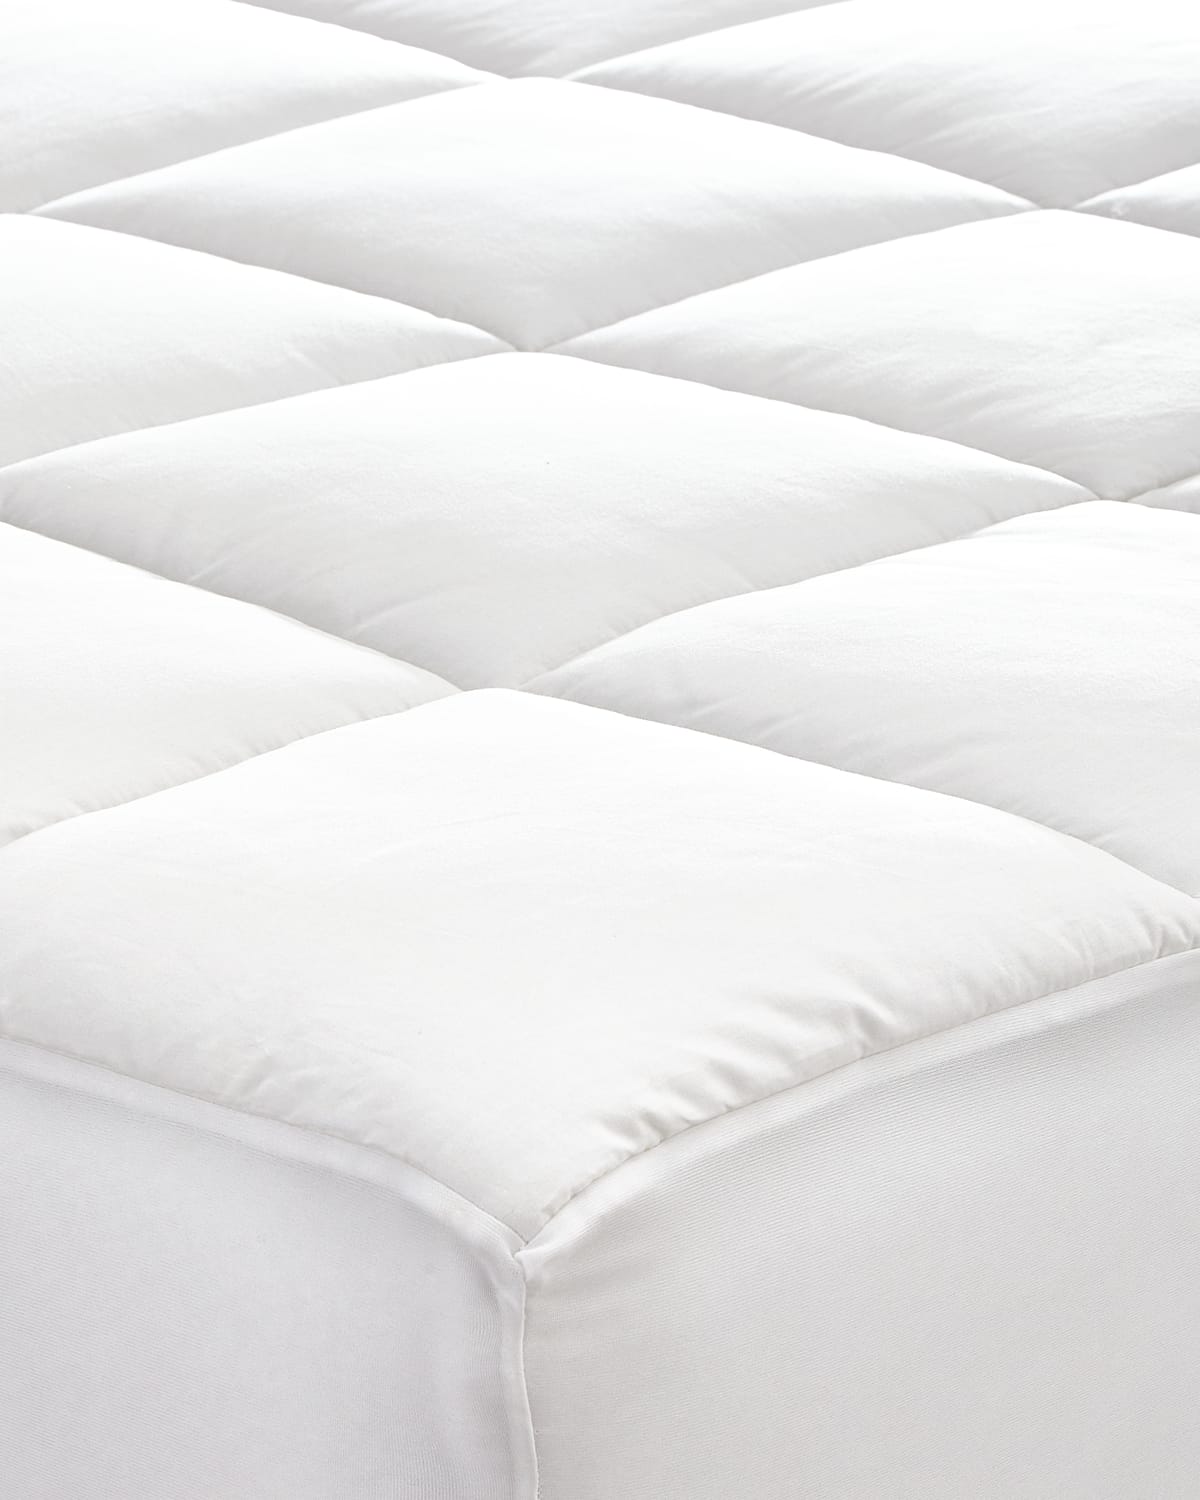 Image Austin Horn Collection Full Fitted Mattress Pad